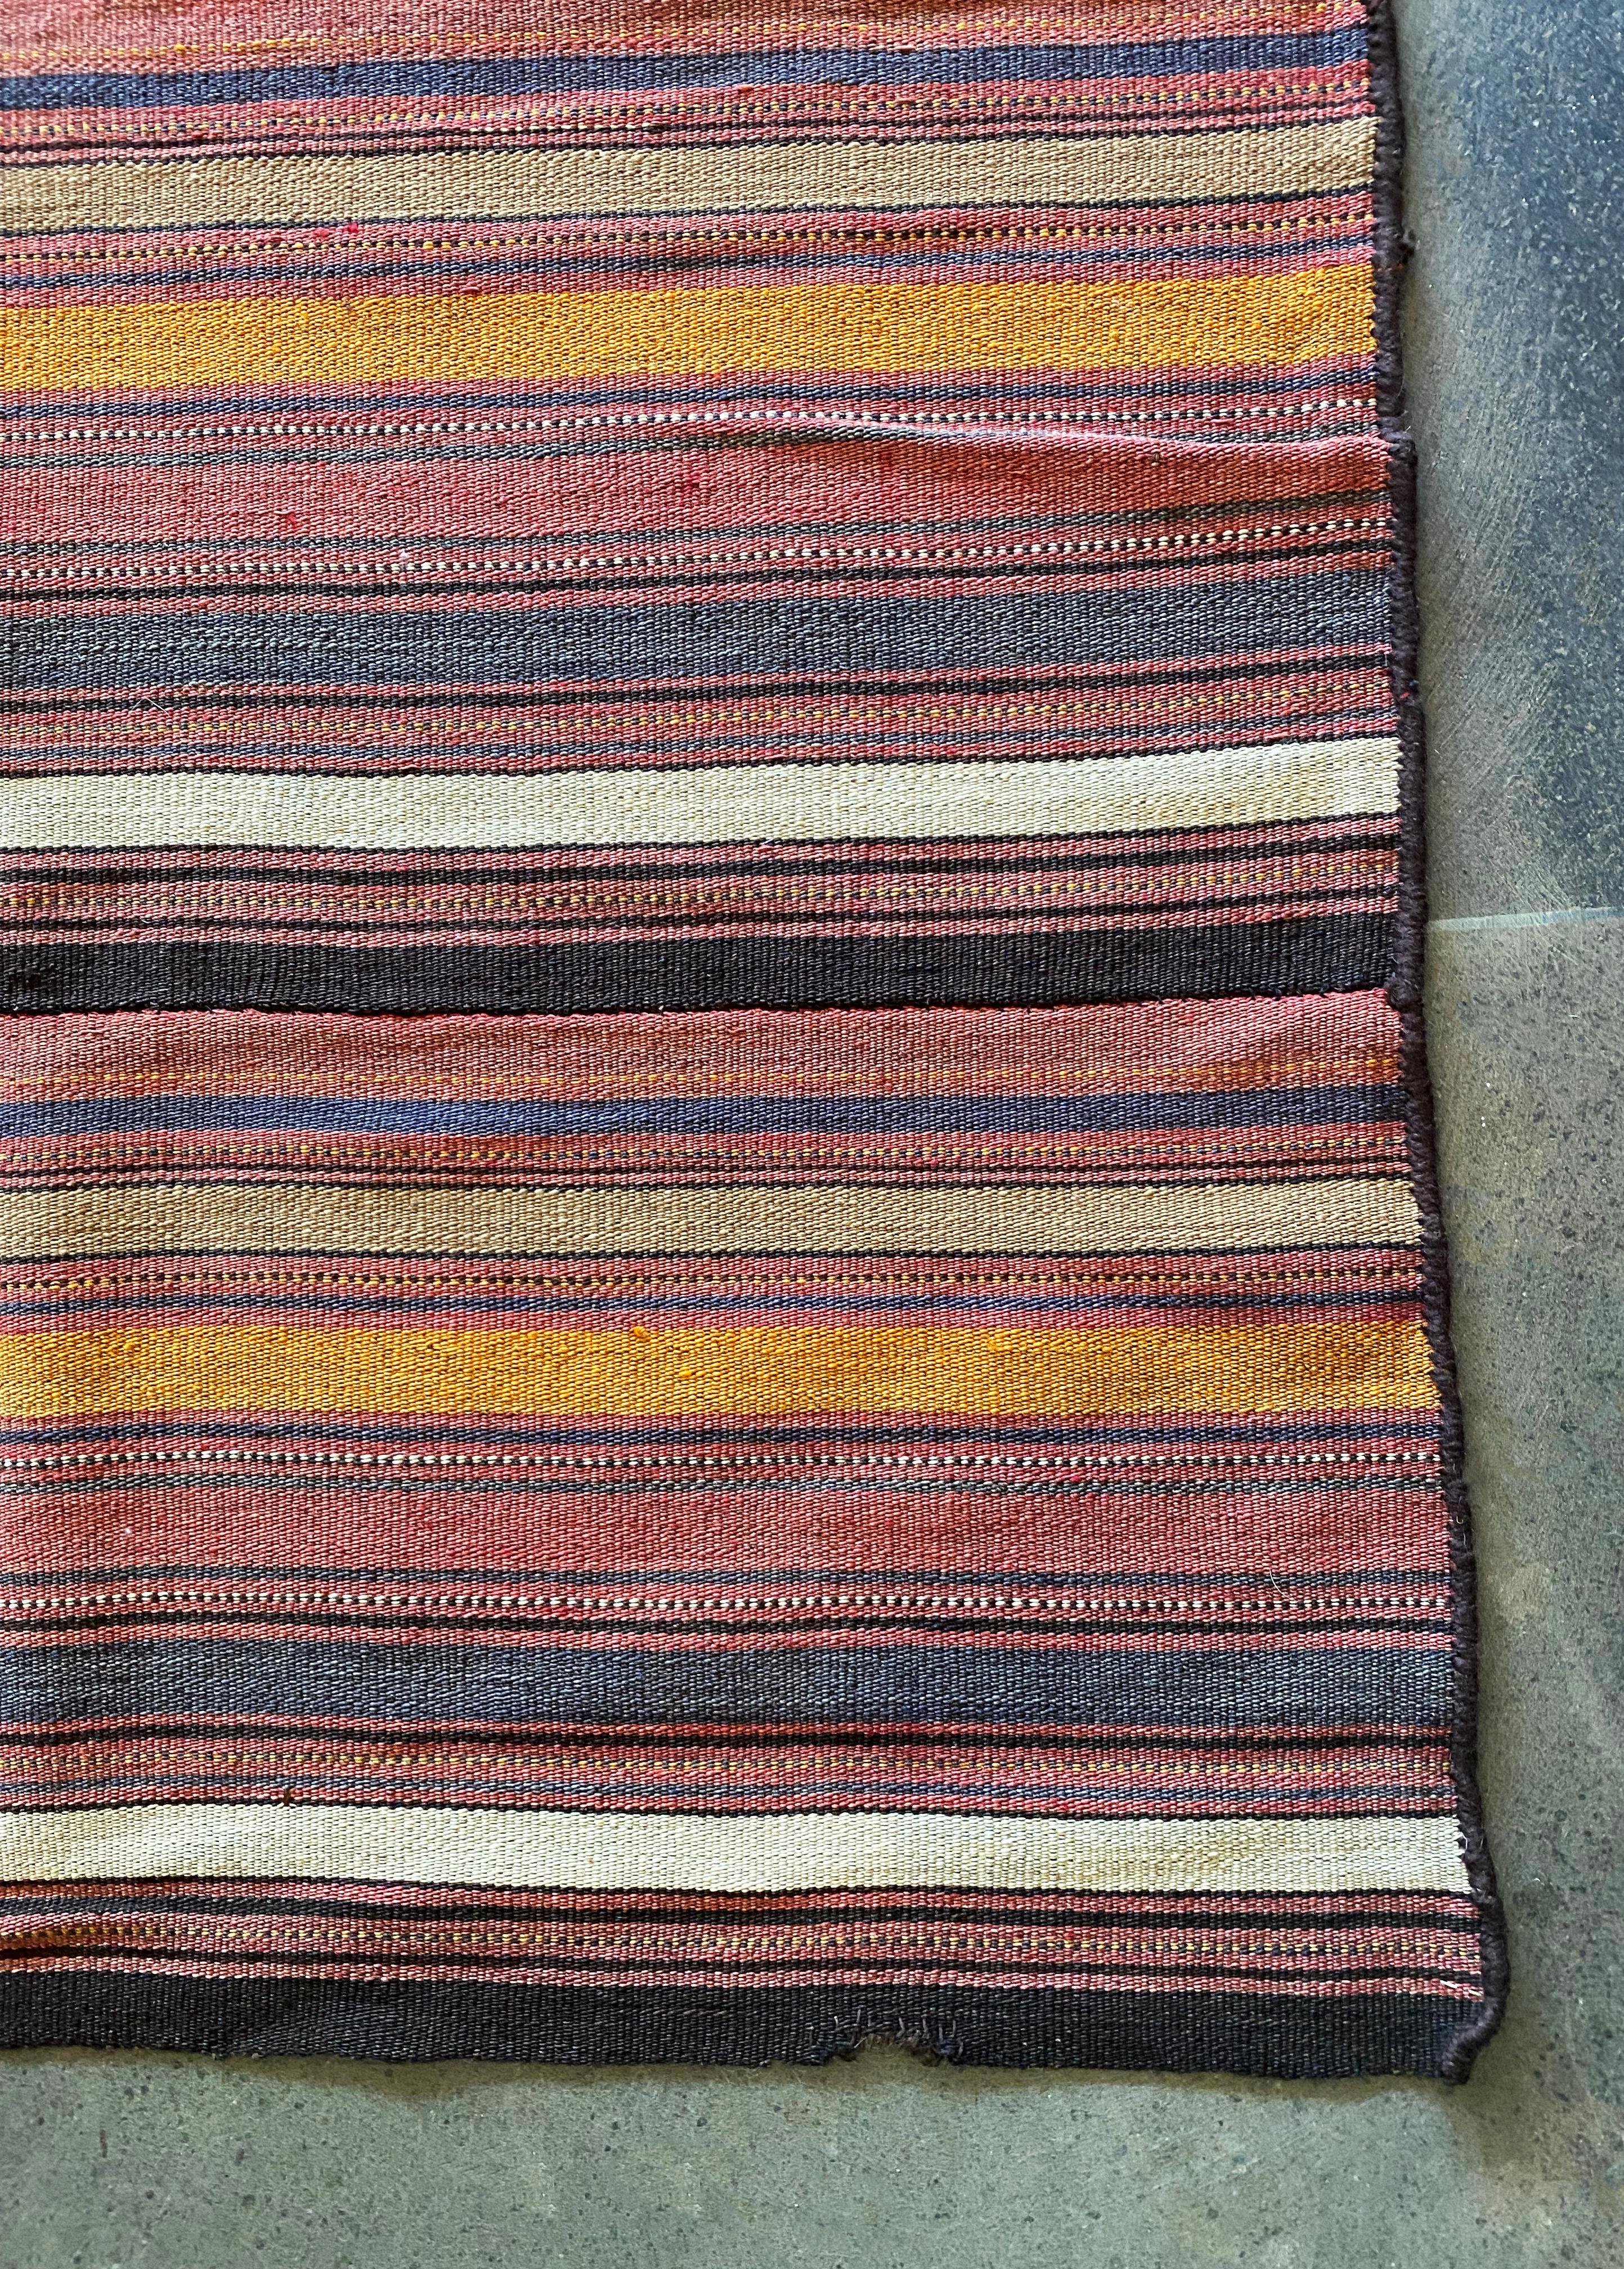 Hand-Knotted Striped, Multicoloured Turkish Wool Kilim Rug, Early 20th Century For Sale